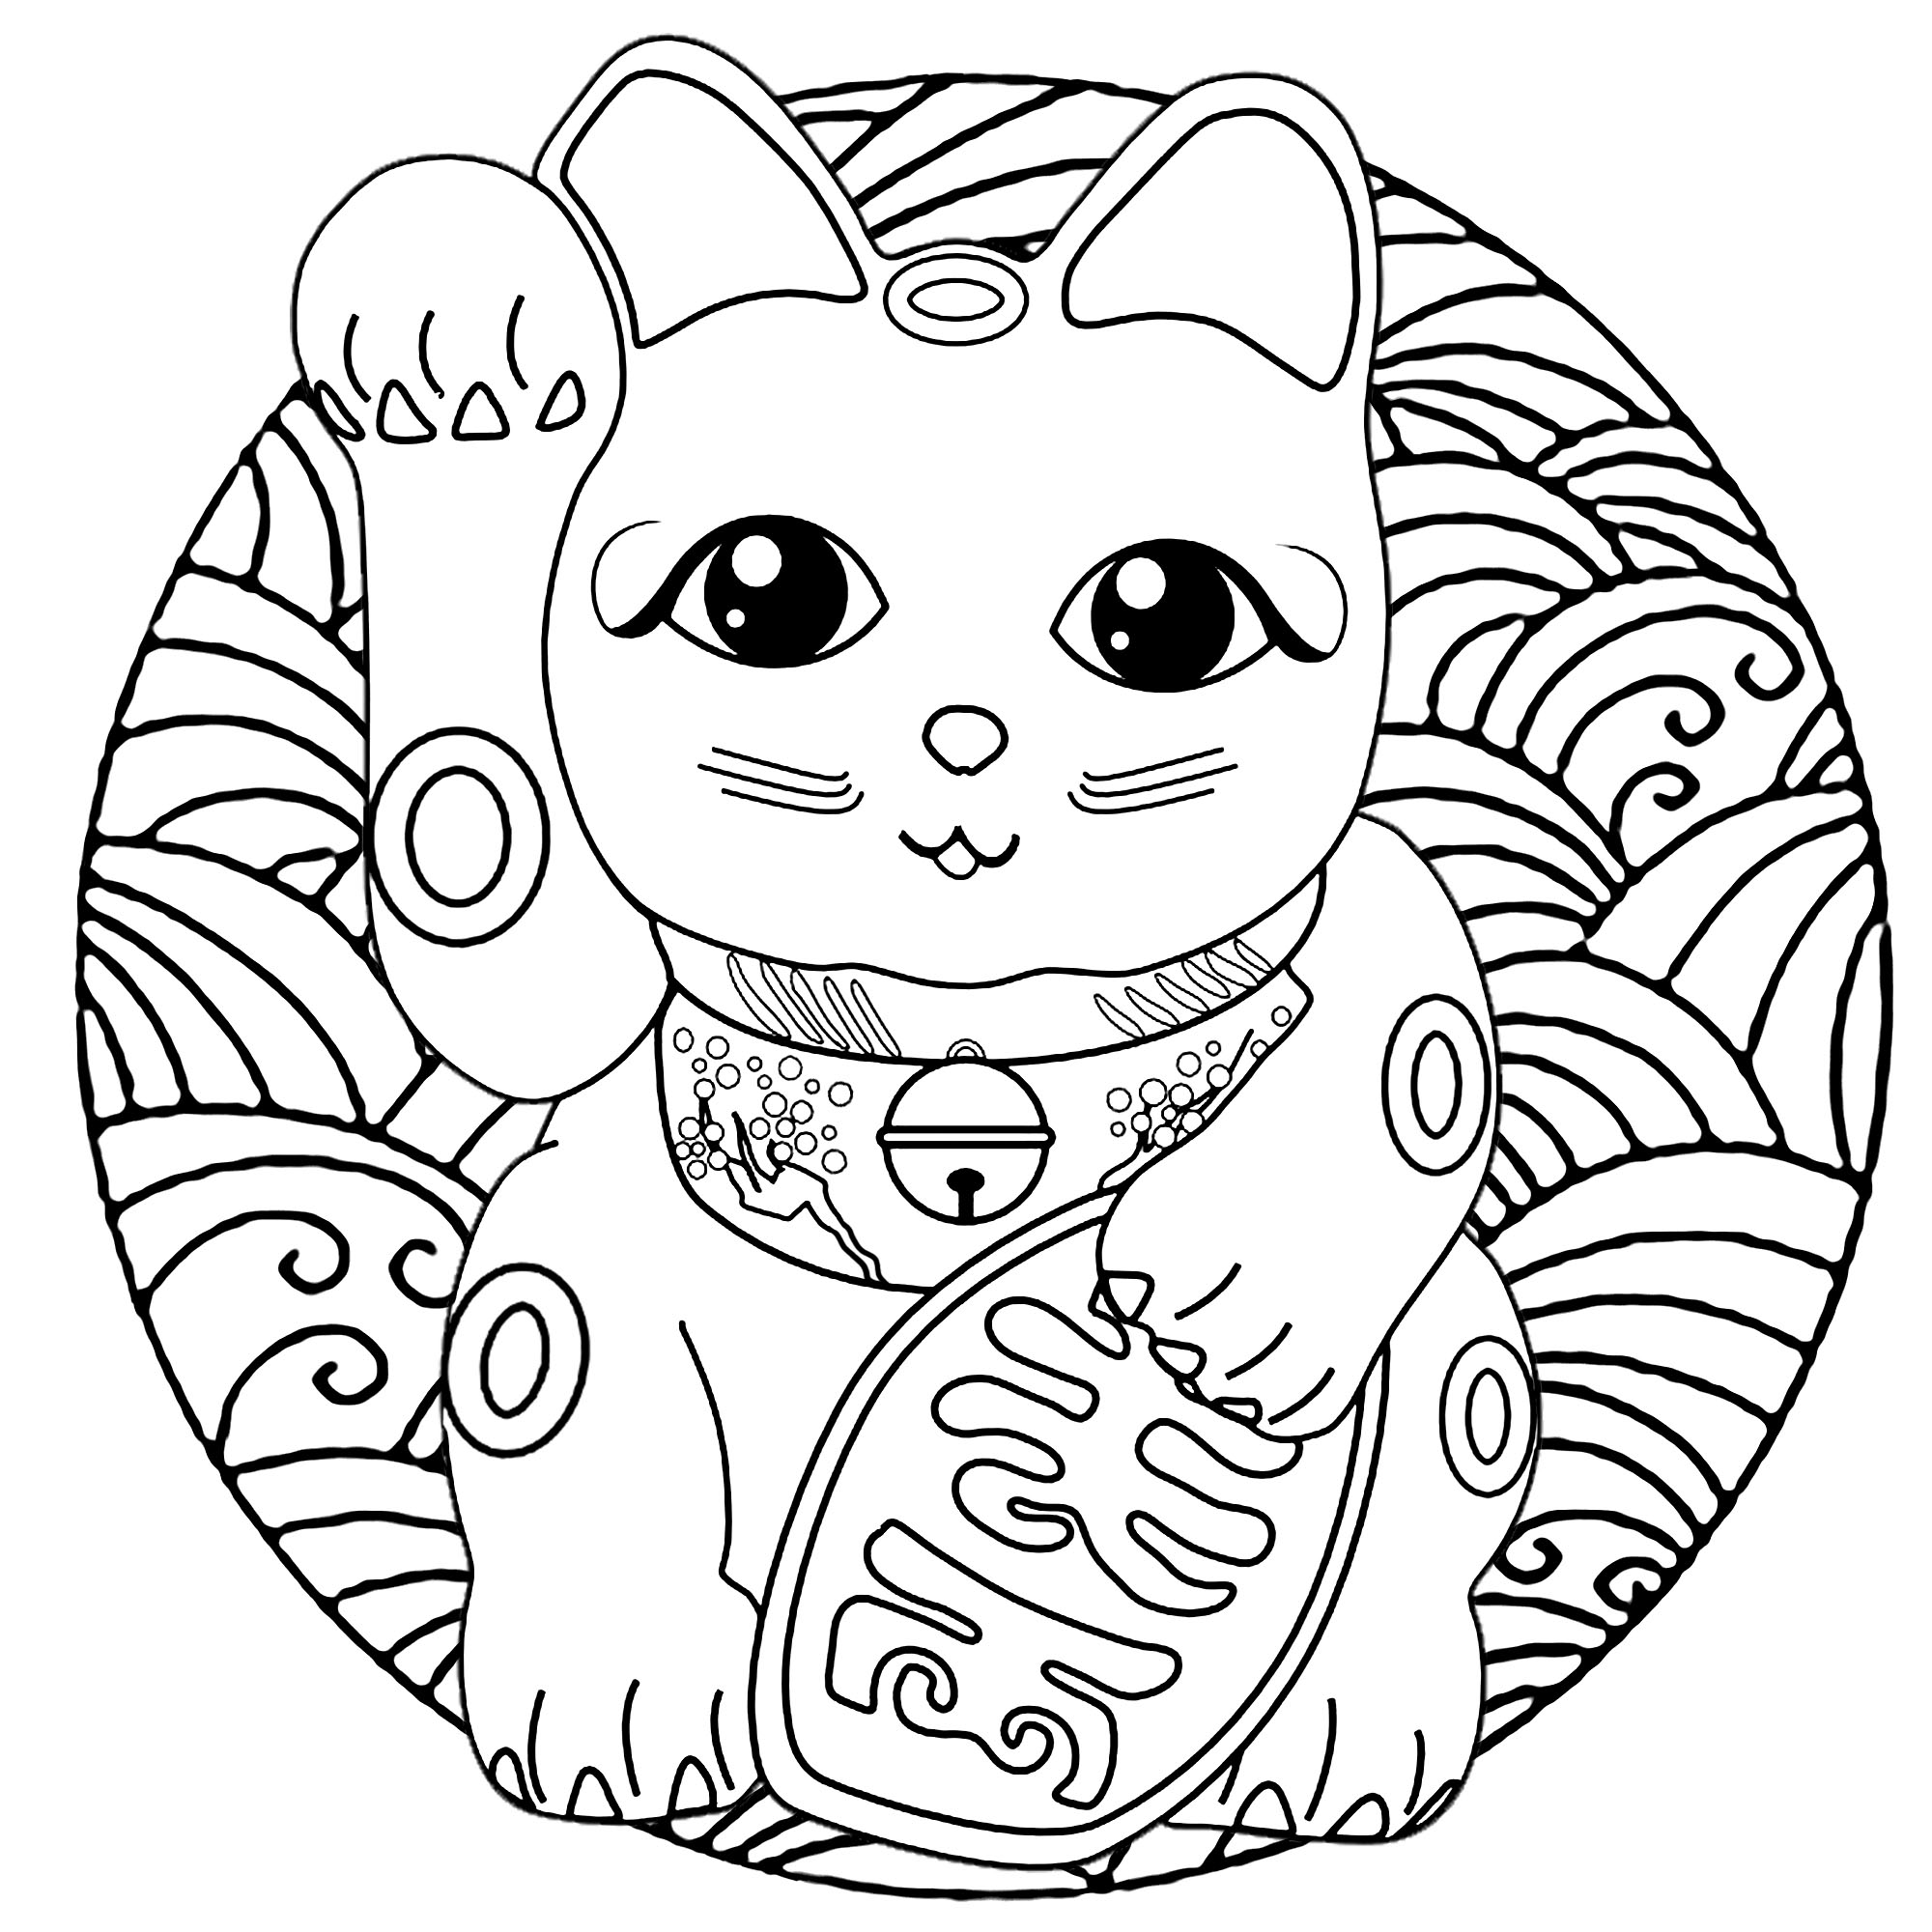 Download Maneki neko - Coloring Pages for Adults